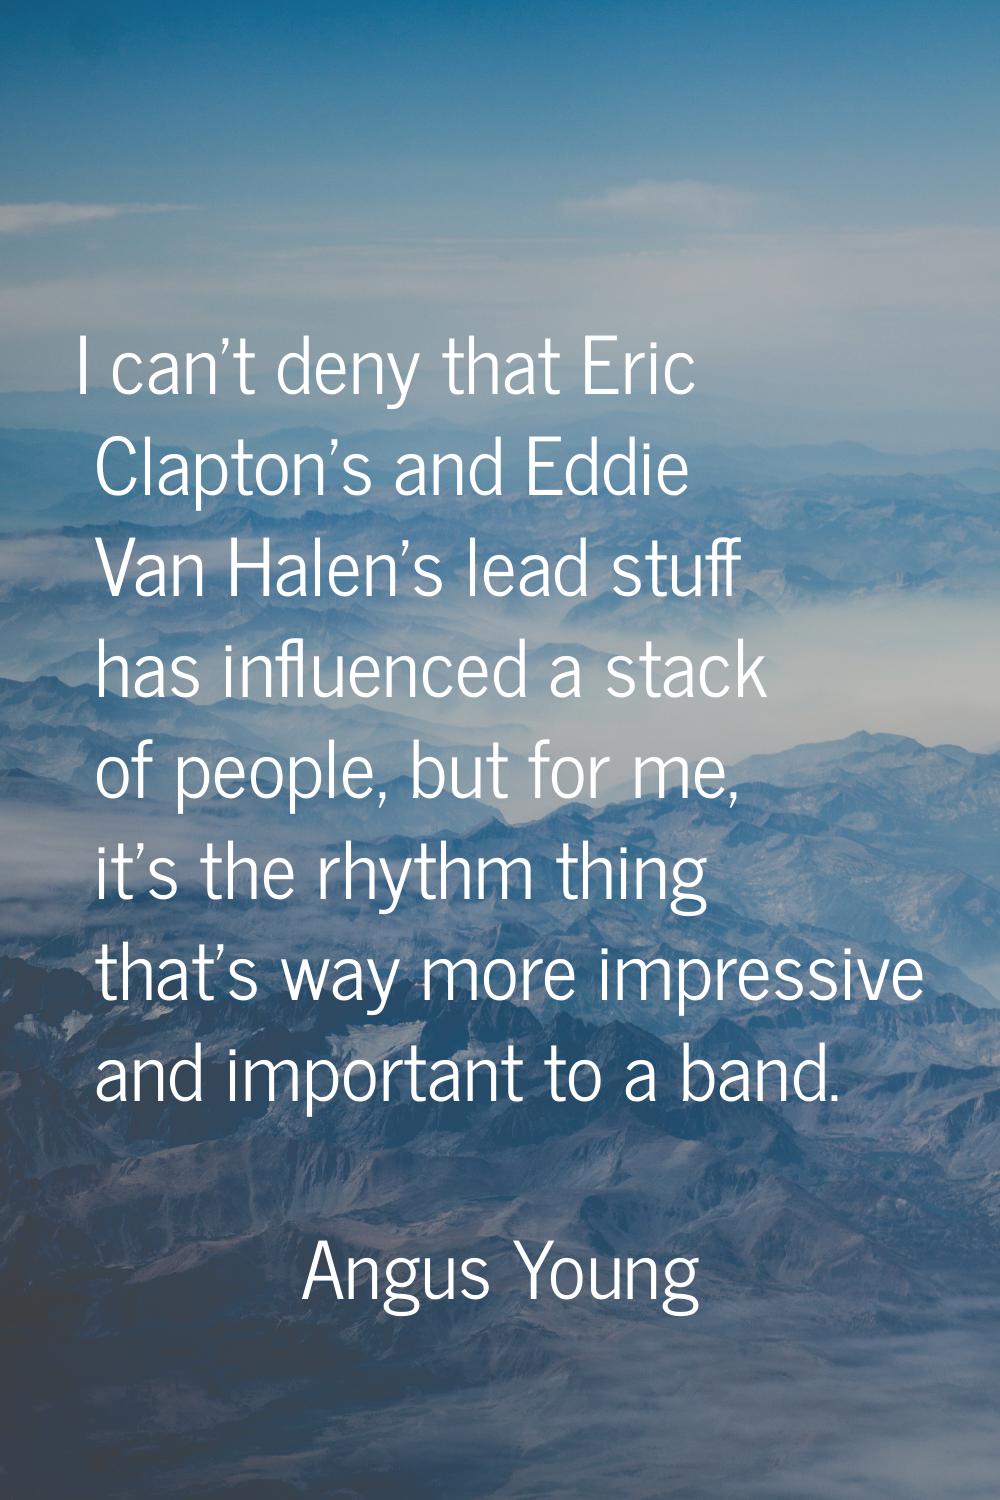 I can't deny that Eric Clapton's and Eddie Van Halen's lead stuff has influenced a stack of people,